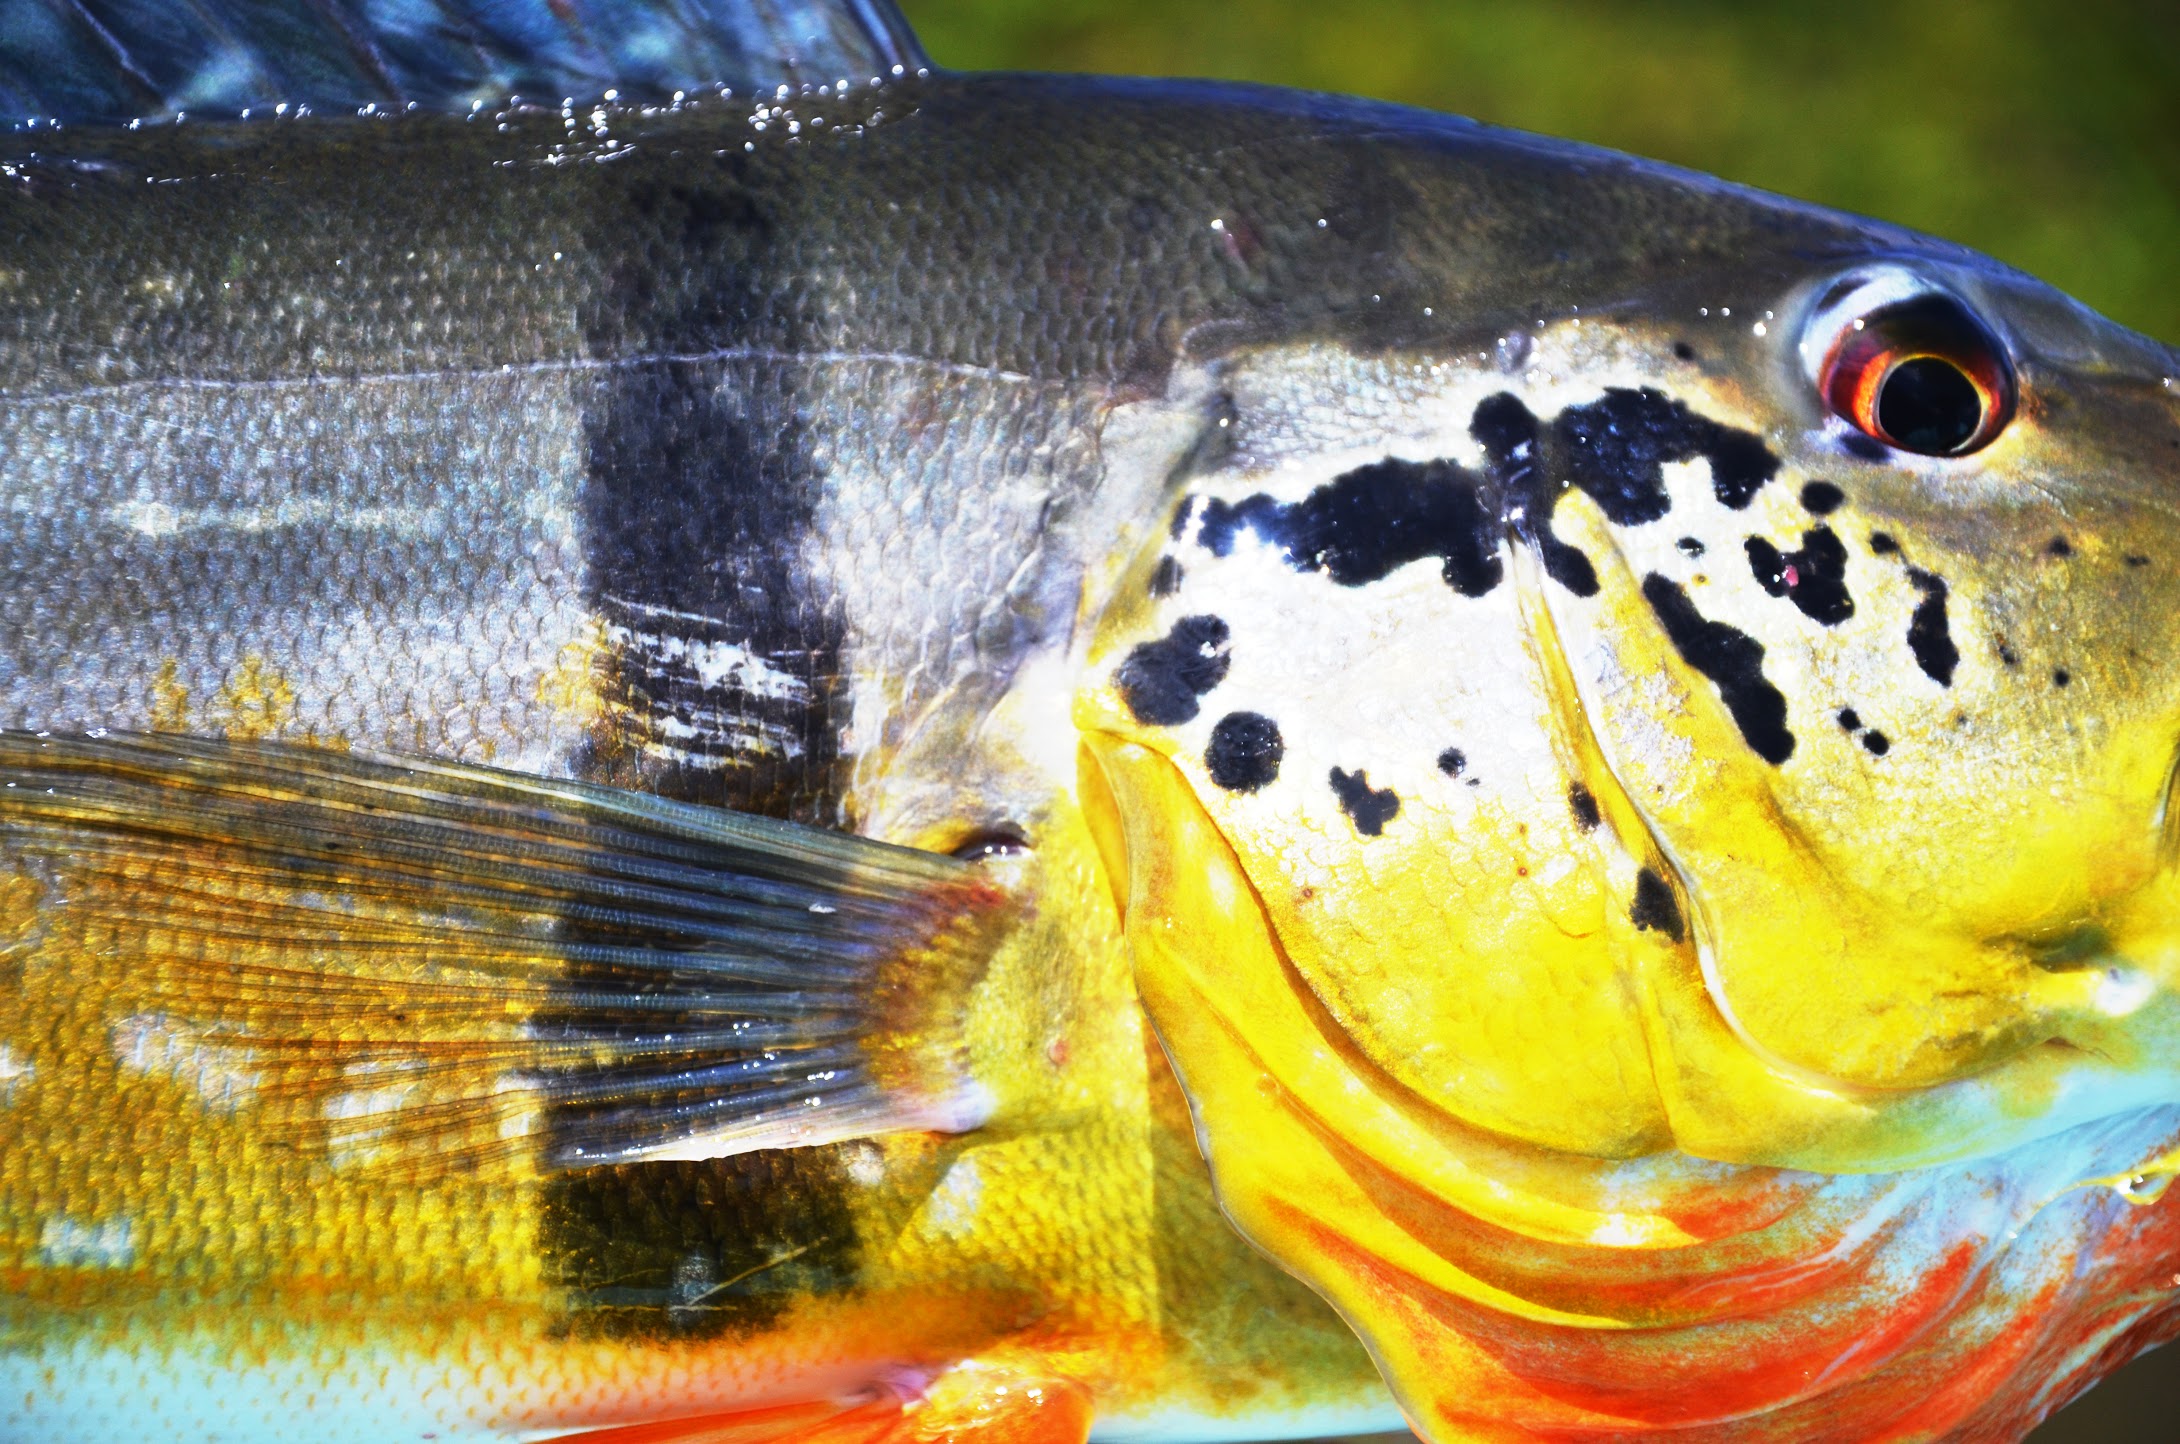 Peacock Bass in Brazil - Tail Fly Fishing Magazine